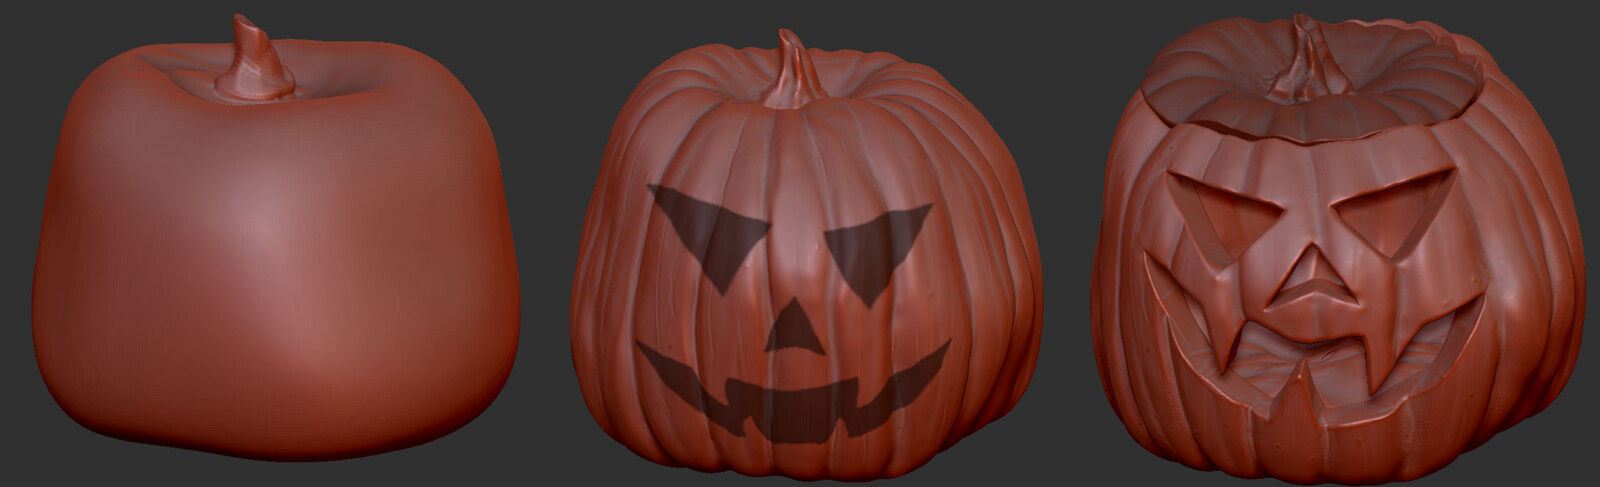 Zbrushcore sculpting process, from initial shape block-out, to a detailed pumpkin with the face masked out, to the final sculpt with a seperated lid and hollowed out centre